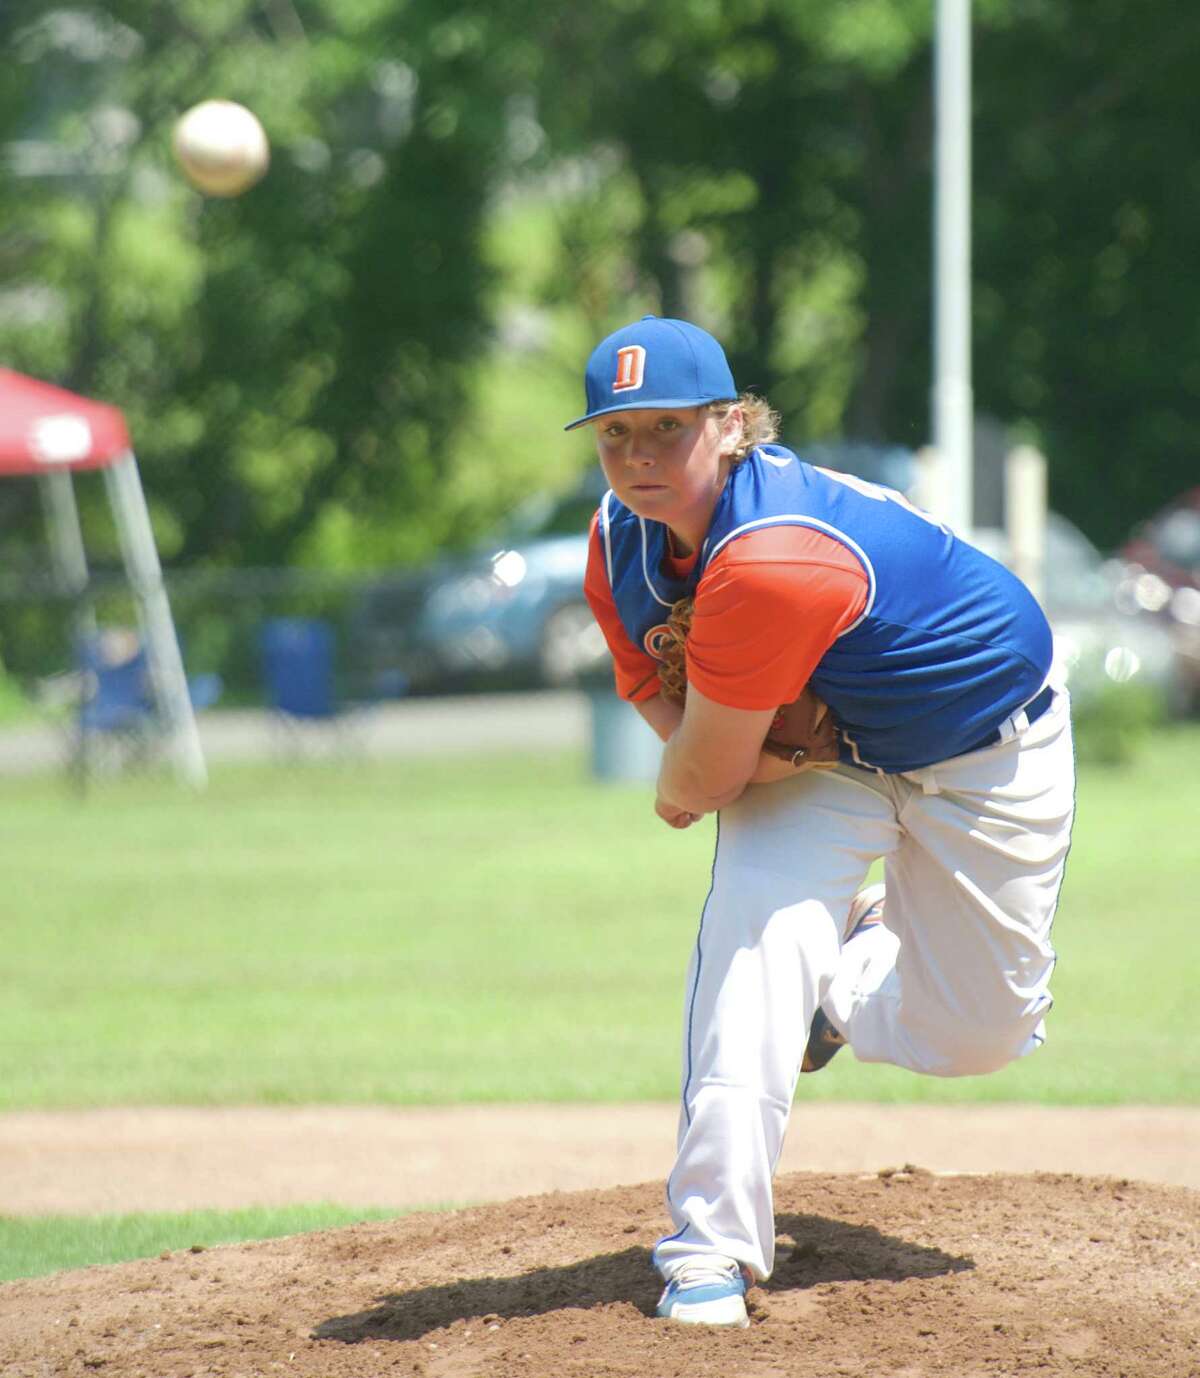 Danbury pitcher Richard Wekerle (24) during the Cal Ripken 12/70 state baseball championship between Newtown and Danbury, Conn, on Saturday, July 12, 2014, played at Town Hall Field, in Roxbury, Conn.